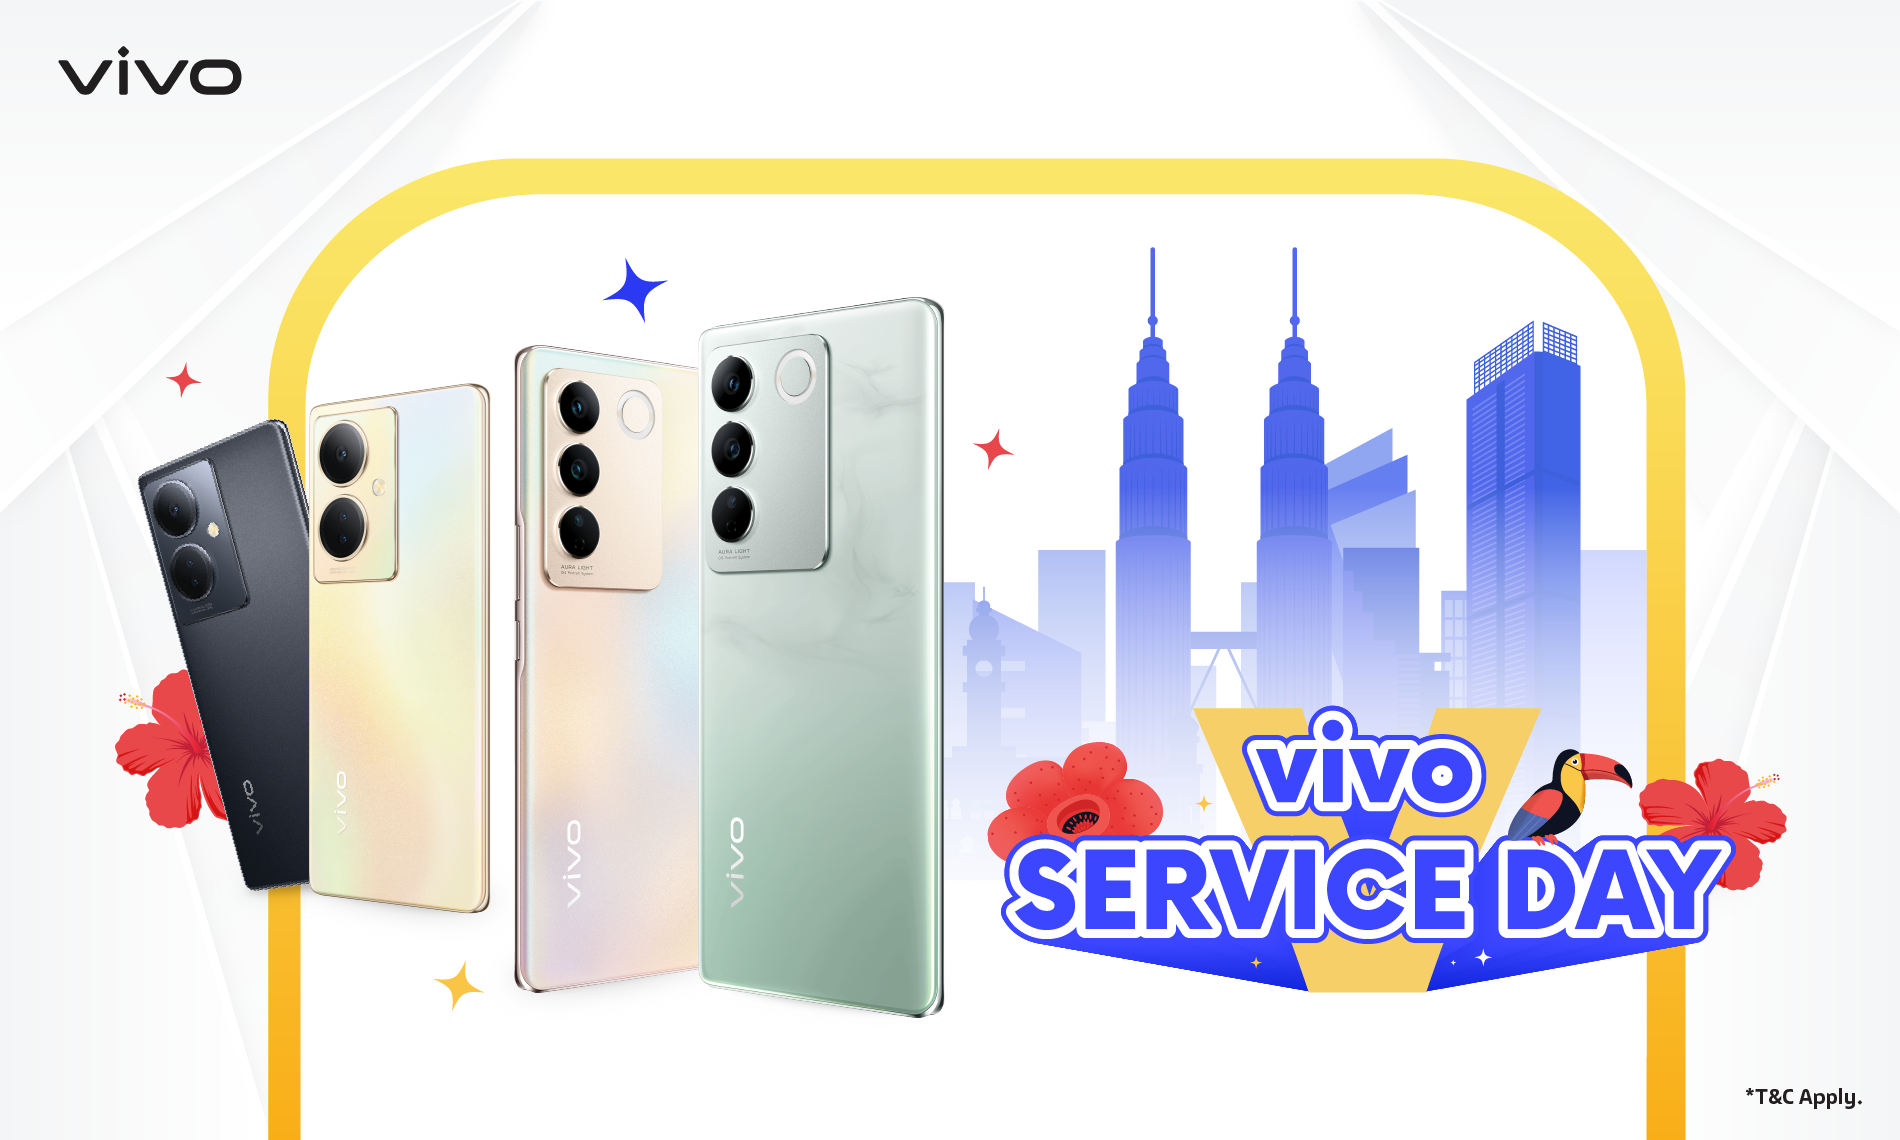 vivo Service Day in August